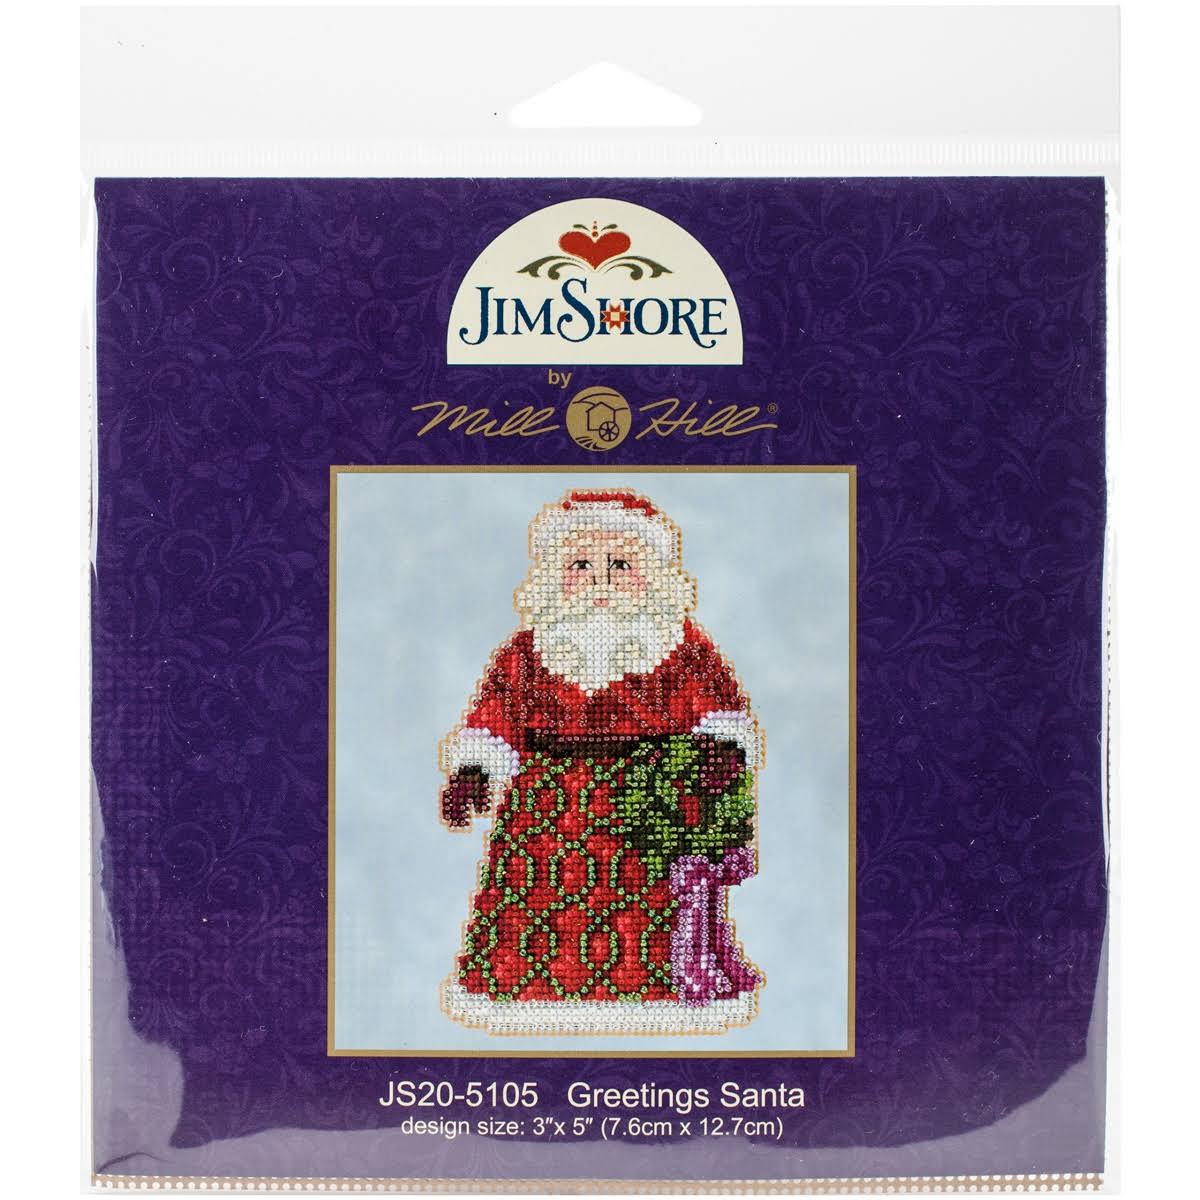 Cross Stitch Kit - Mill Hill / Jim Shore - Greetings Santa Js20-5105 | General | Free Shipping On All Orders | Delivery guaranteed